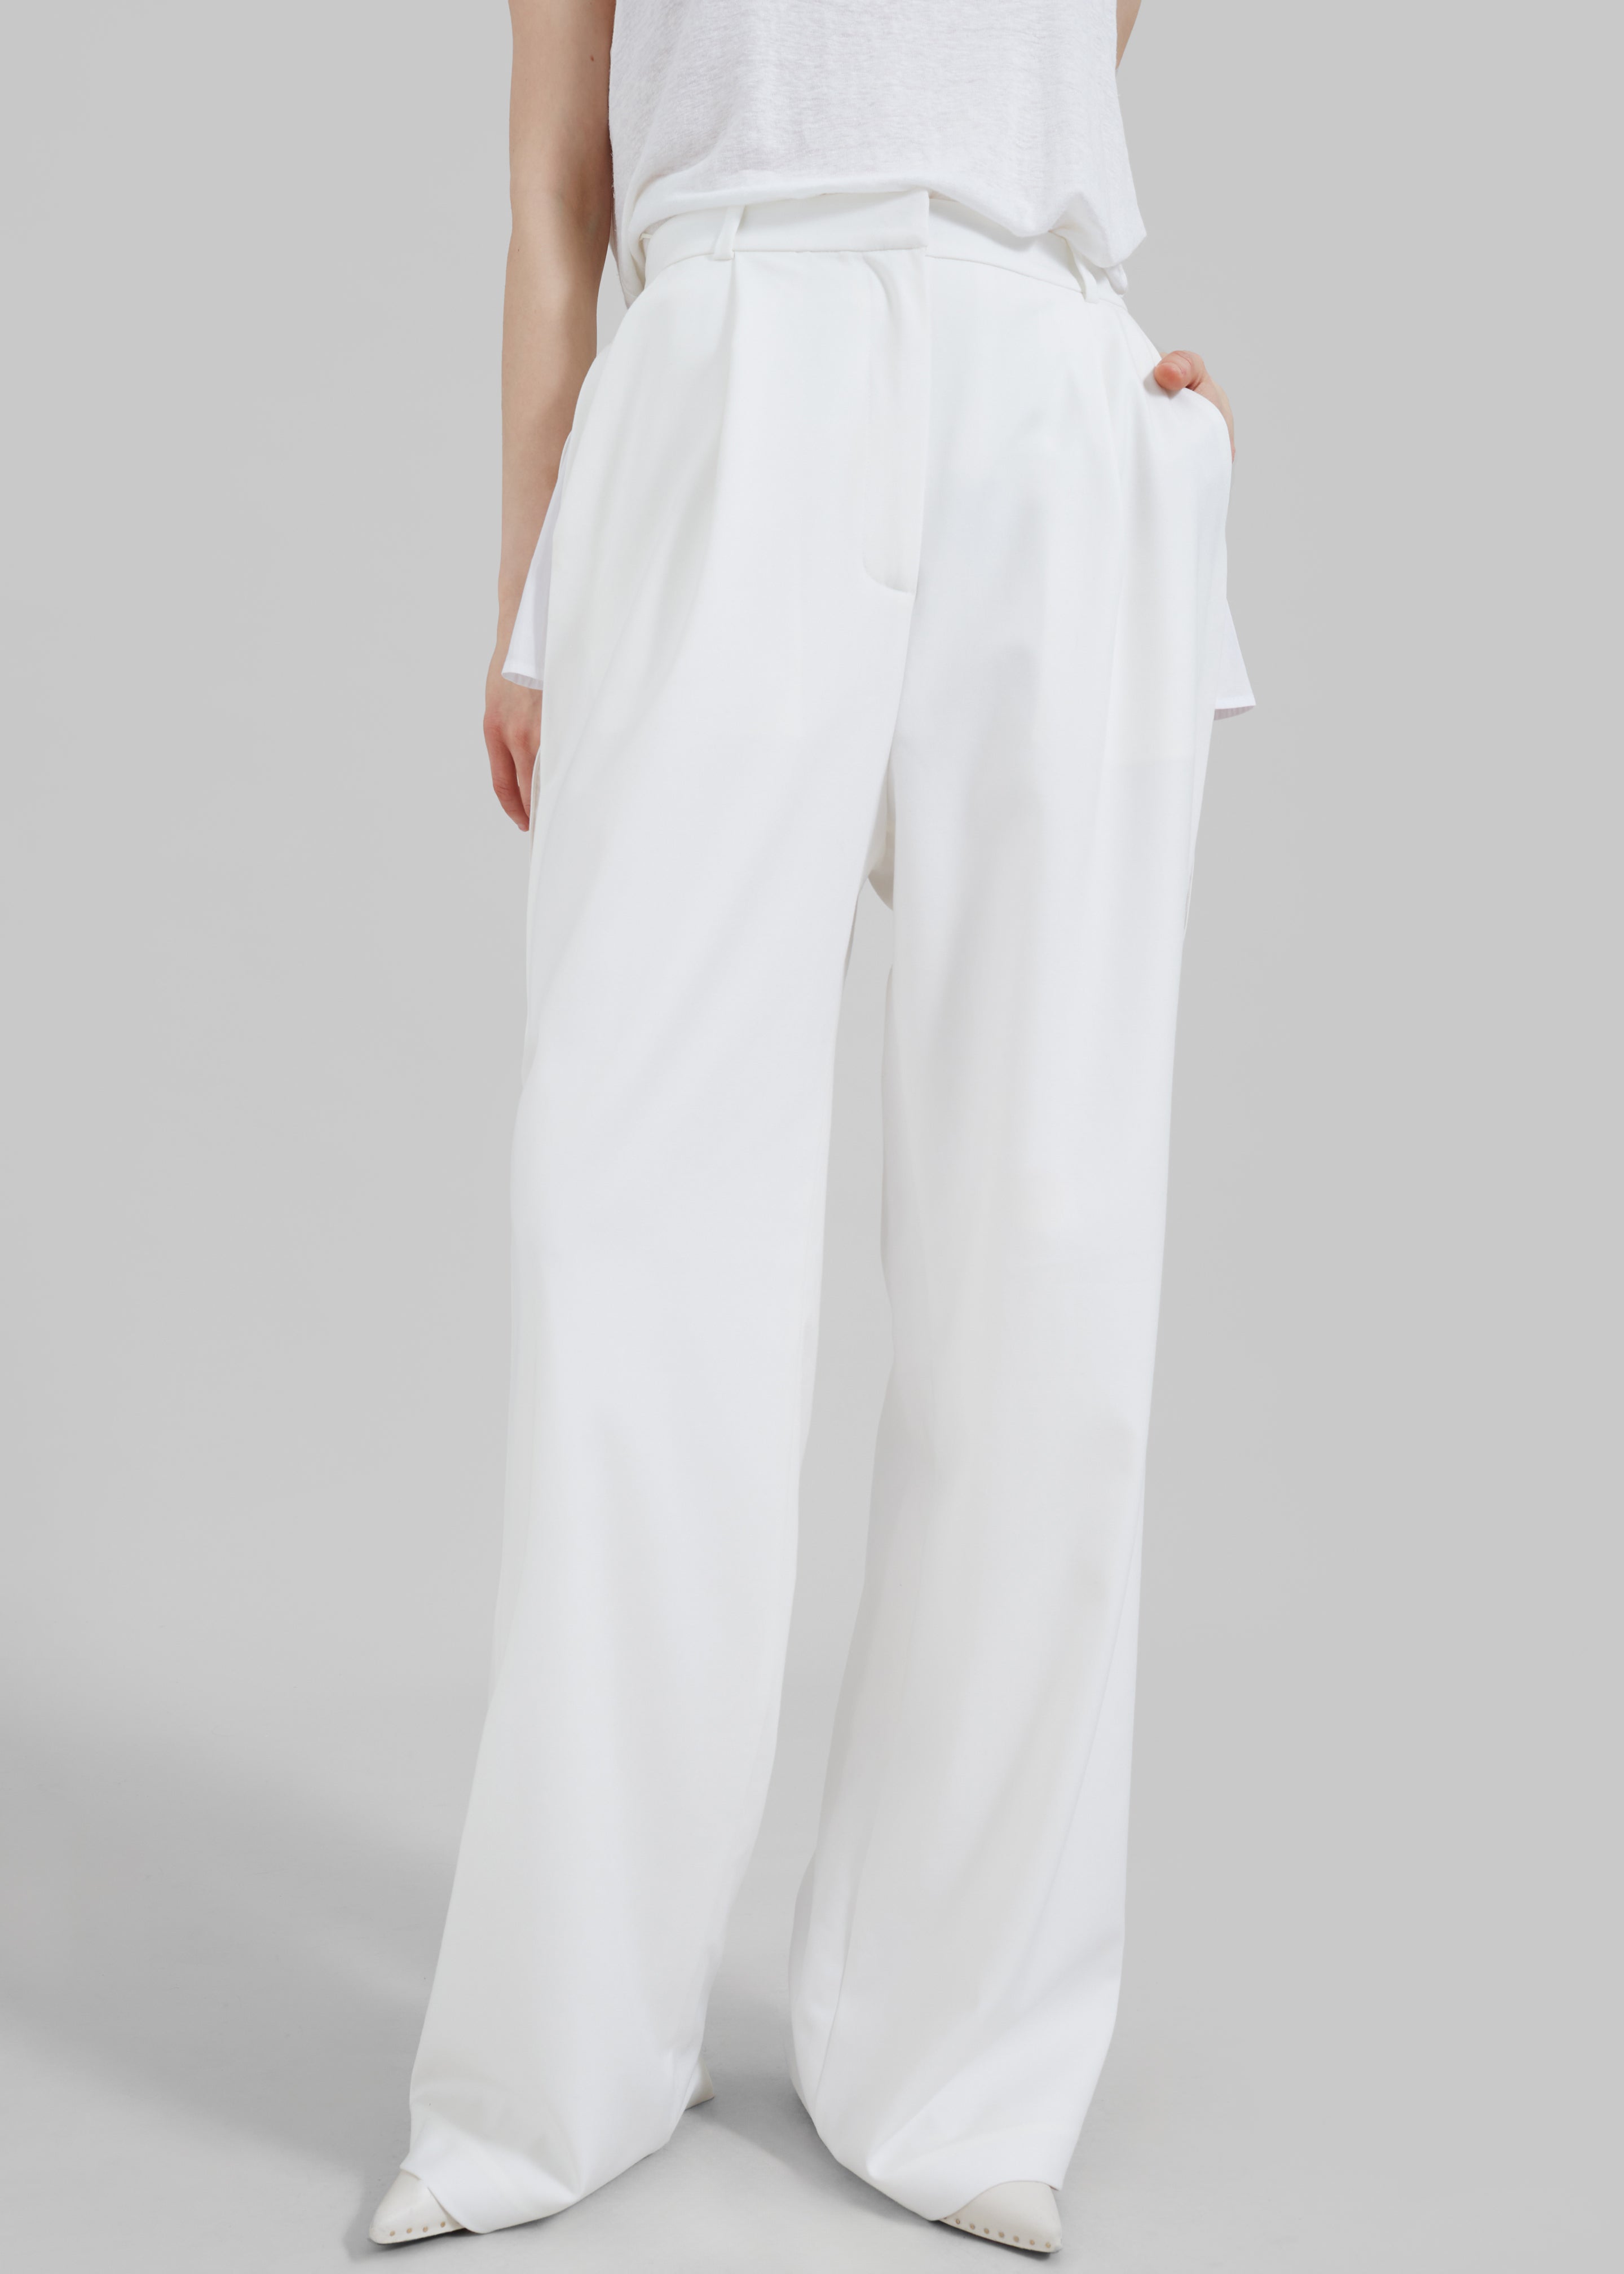 Bevza Trousers With Slits - Ivory - 4